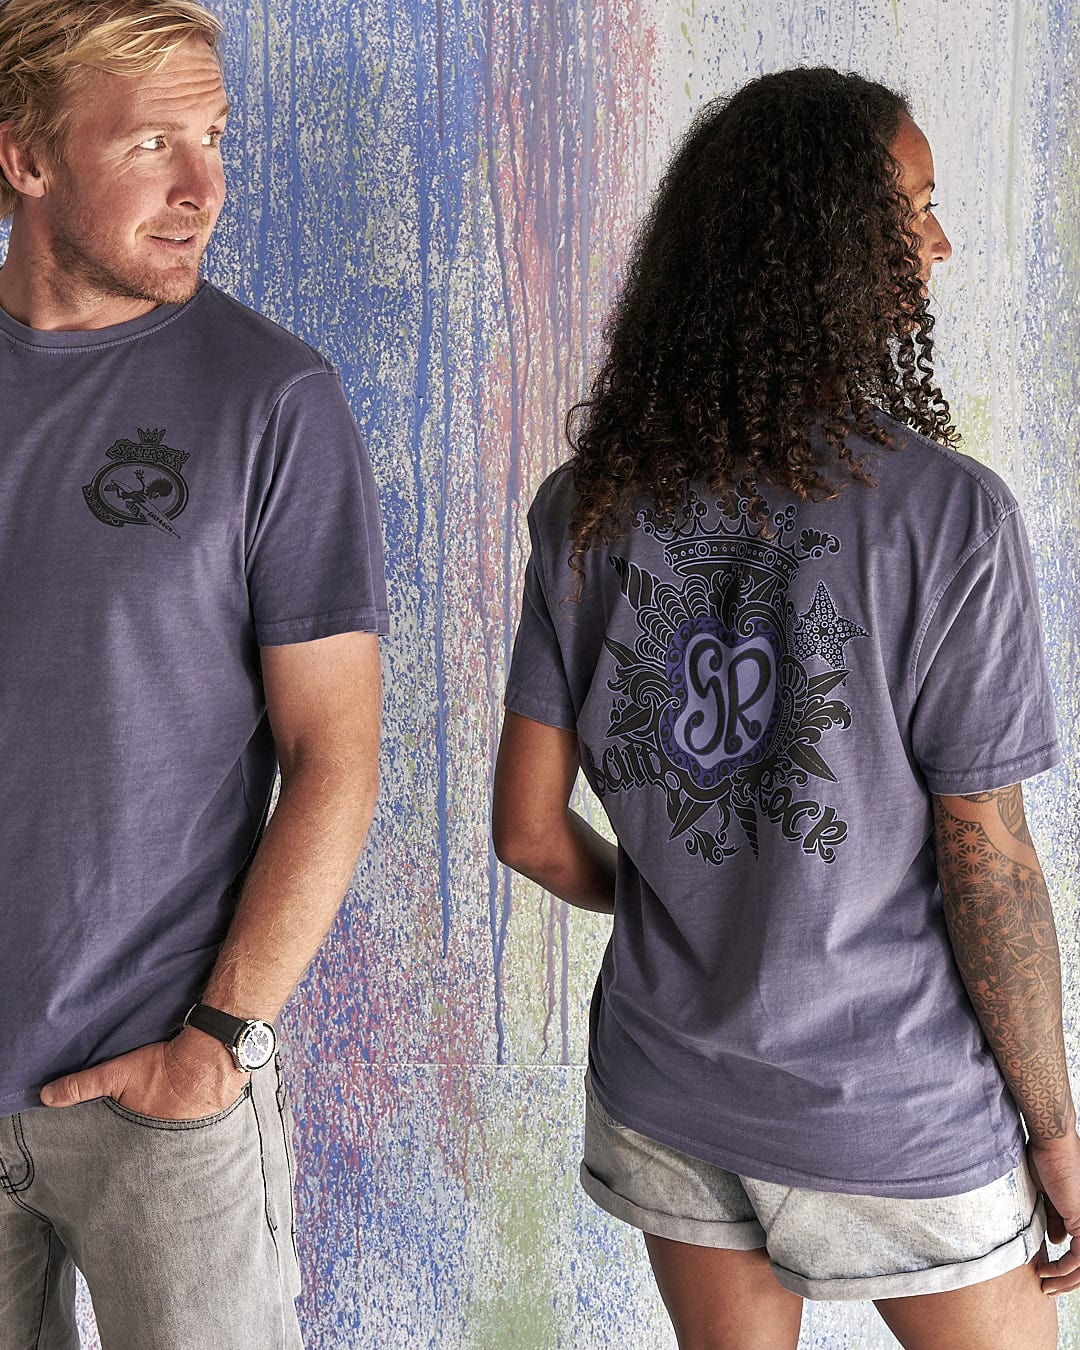 A man and woman standing next to each other wearing a Saltrock - Tribal Saltrock Limited Edition 35 Years T-Shirt.